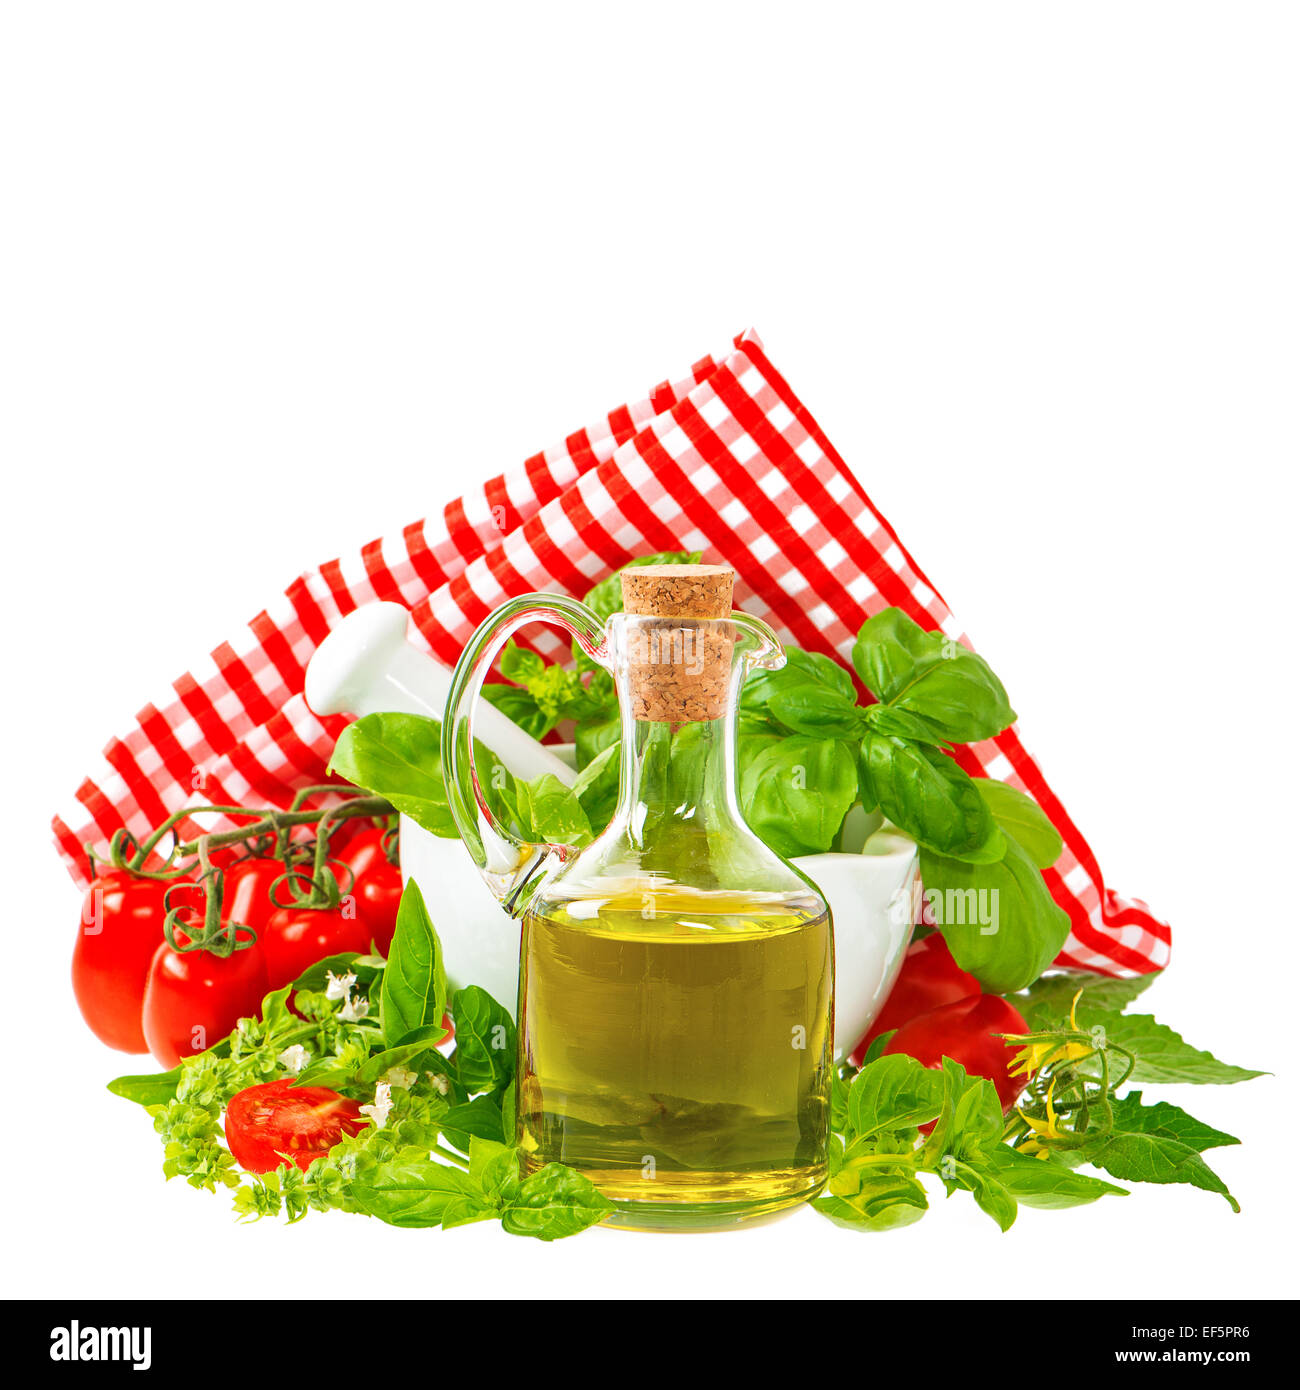 olive oil with fresh basil leaves and tomatoes isolated on white. italian food ingredients Stock Photo